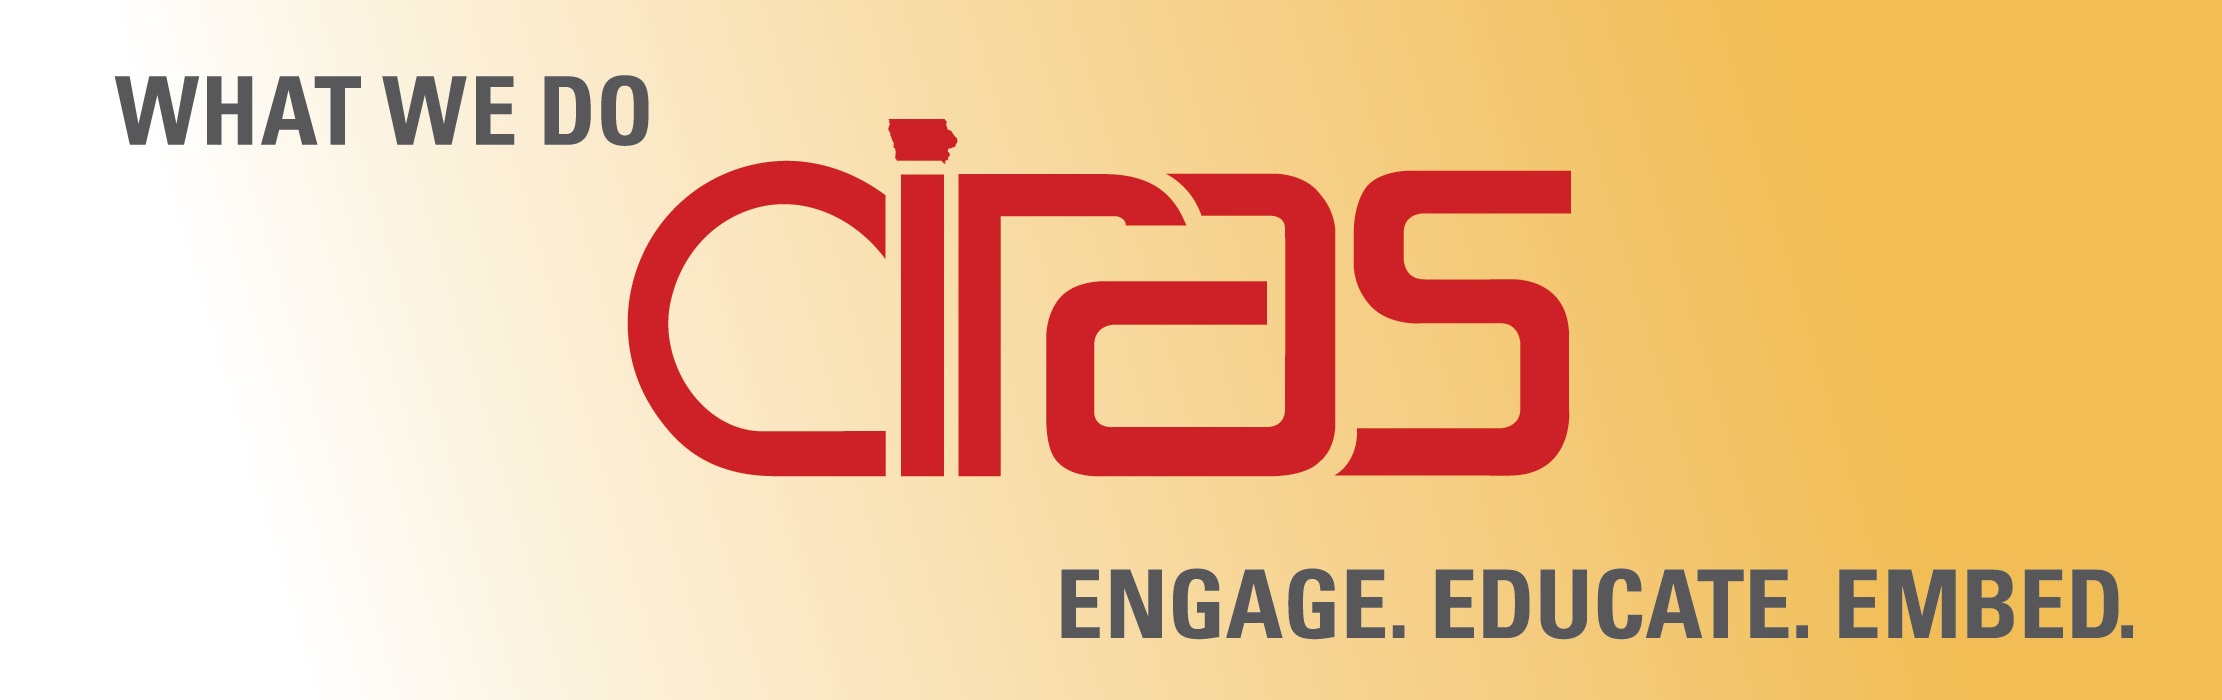 What we do at CIRAS: Engage, Educate, Embed.